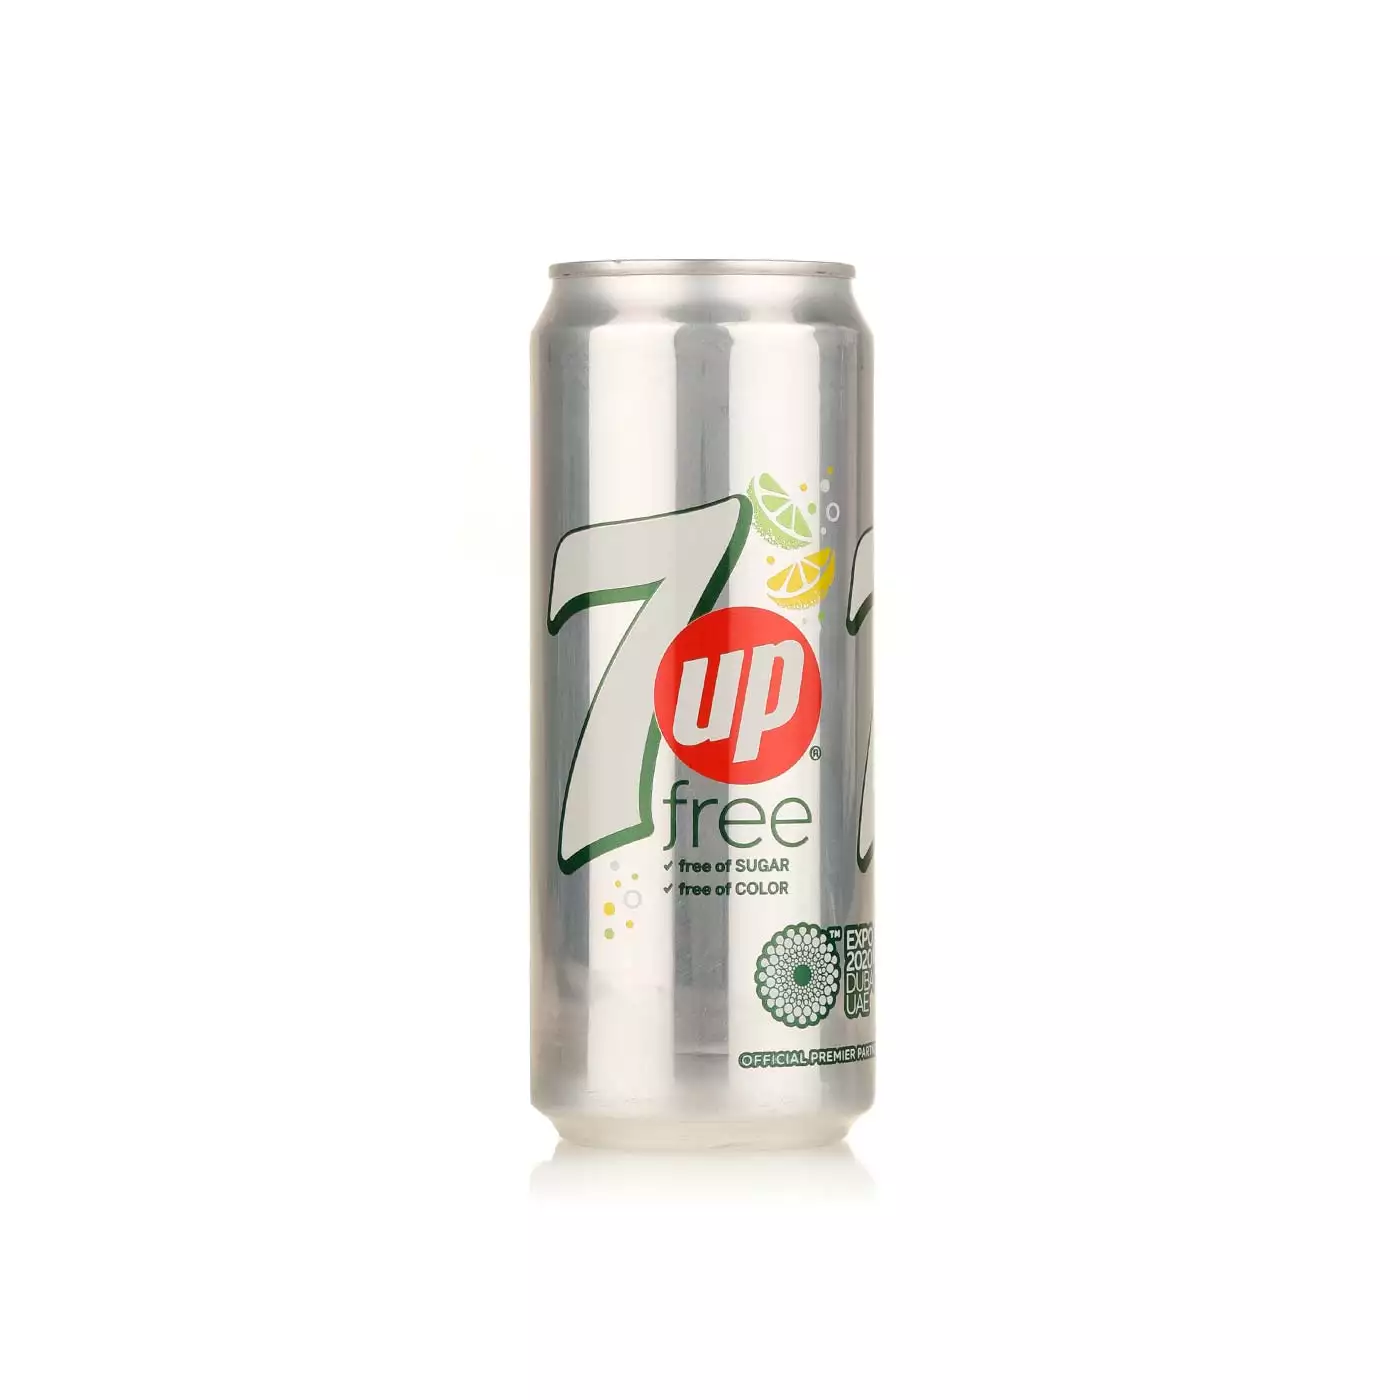 7 UP FREE S& C CAN 330 ML